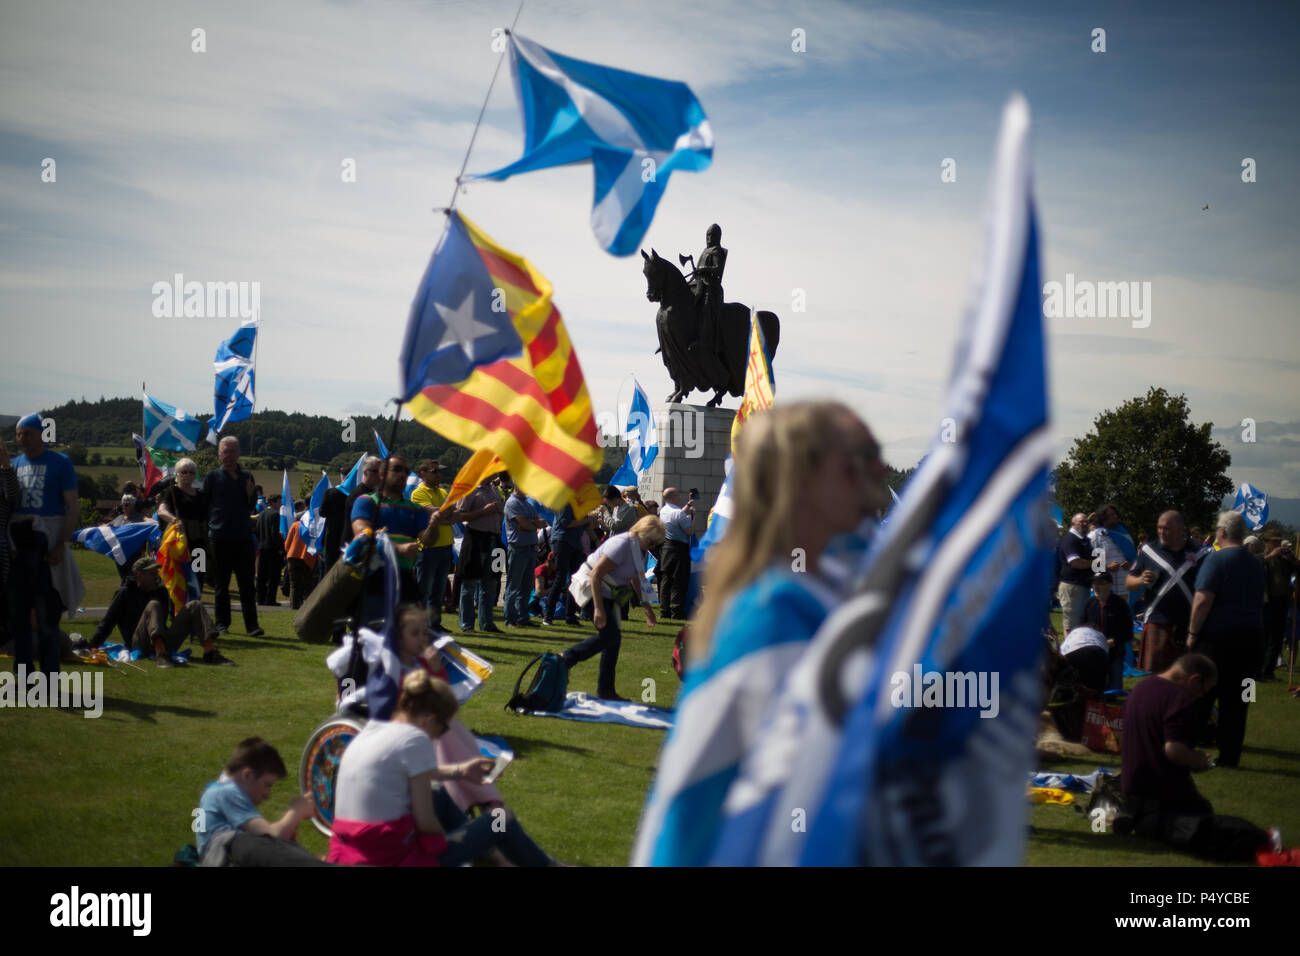 Stirling, Scotland, UK. 23rd June 2018.  Pro-Scottish Independence march, organised in the 'All Under One Banner' name, through the streets and to the battlefield, and statue of King Robert the Bruce,  in Bannockburn on the 704th anniverary of the Battle of Bannockburn. It was estimated that 10,000 people took part in the march calling for a second independence referendum. Photo credit Jeremy Sutton-Hibbert/Alamy Live News. Stock Photo